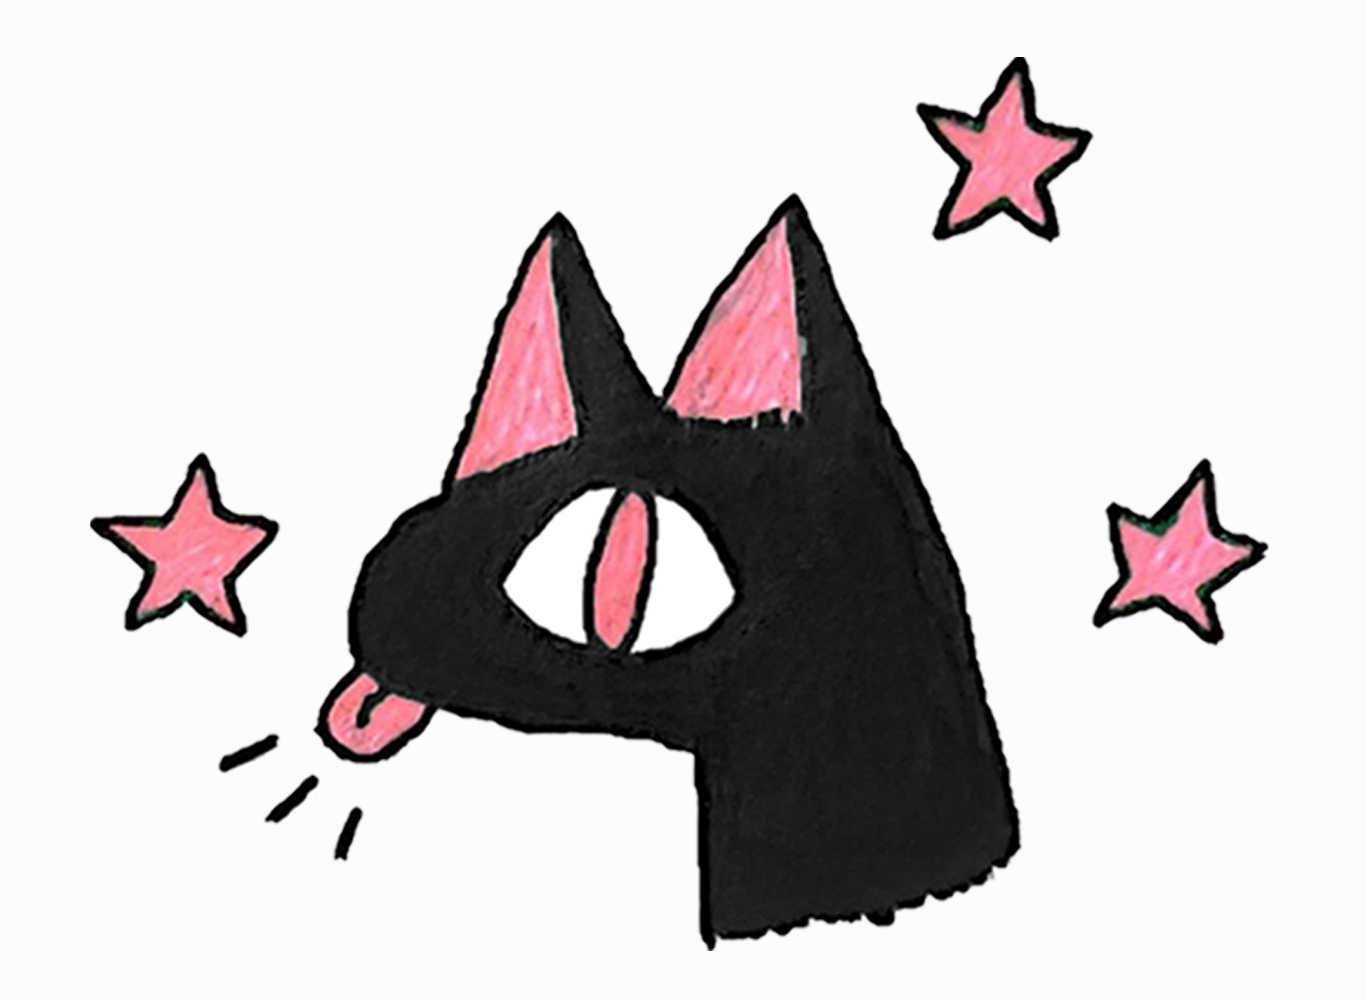 Headshot drawing of a simply stylized, vaguely cat-like critter that is solid black with pink details and a pink tongue extending from their face with 3 thin black emphasis lines surrounding it. The critter is surrounded by 3 small pink stars and lies on a slightly off-white background.